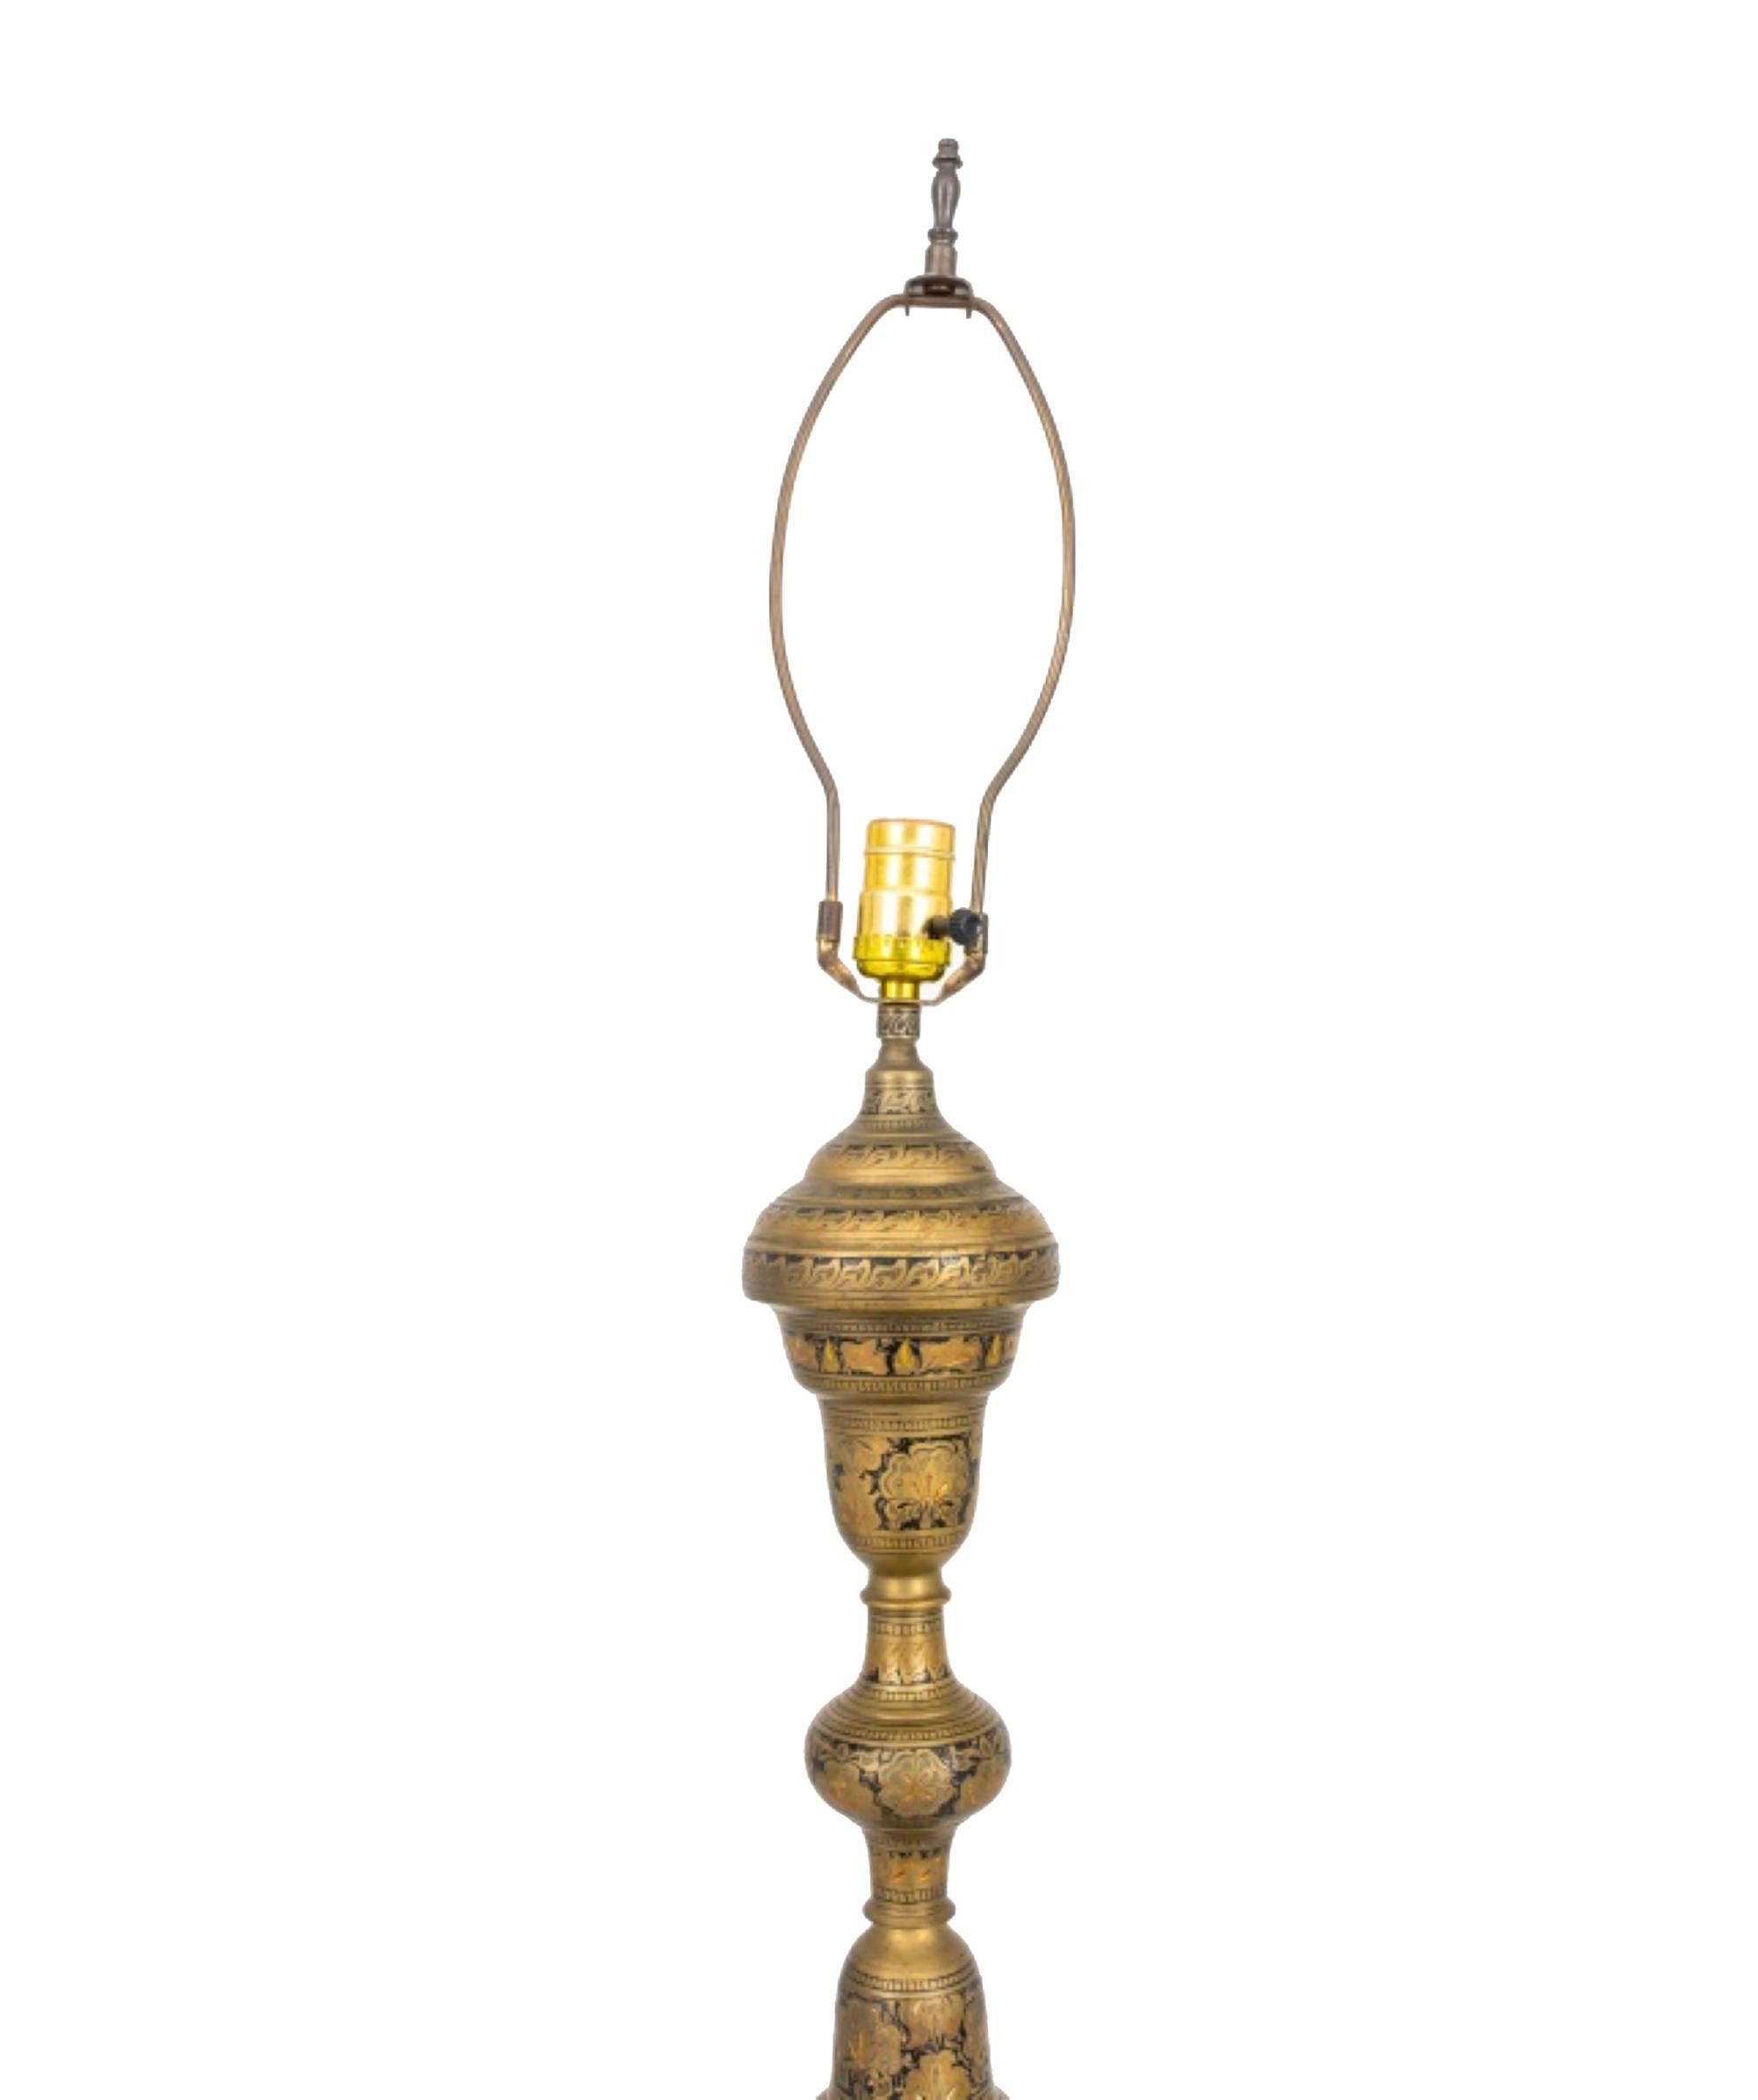 The Moroccan engraved brass floor lamp is approximately 64 inches in height, and the base has a diameter of 10 inches.




